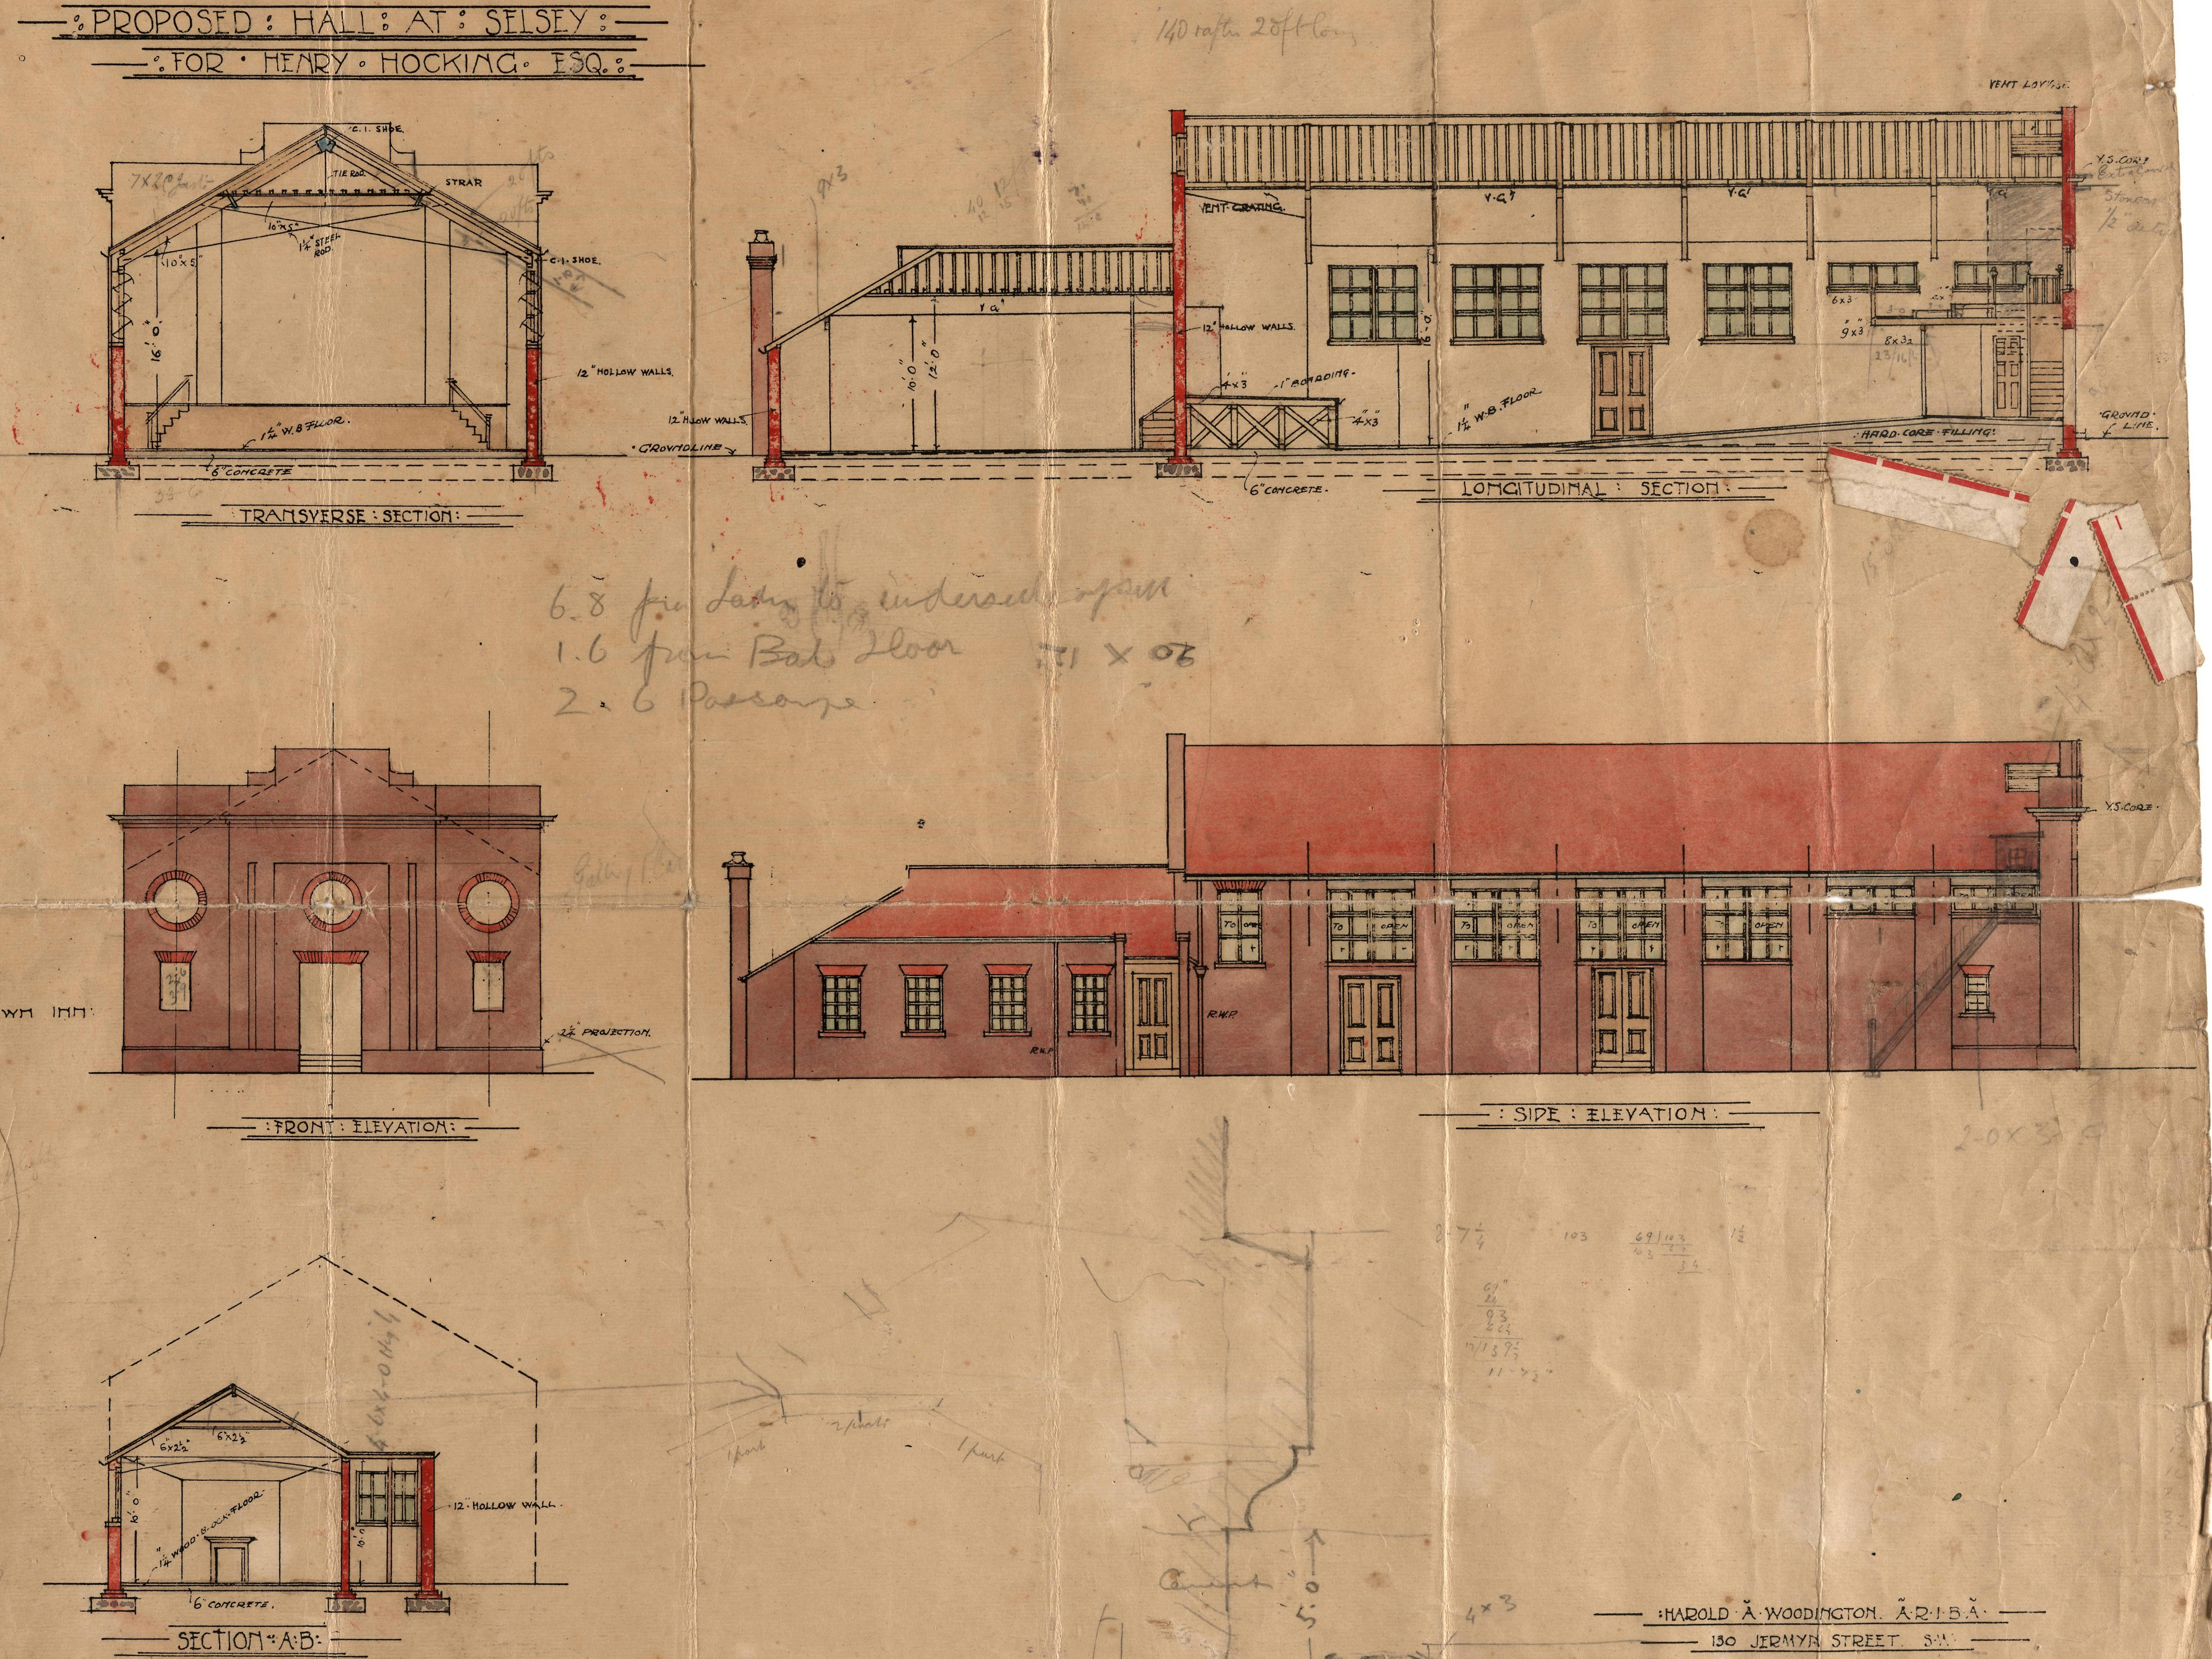 A scanned copy of the original architect's drawings for the Selsey Pavilion which includes side elevations and frontage design